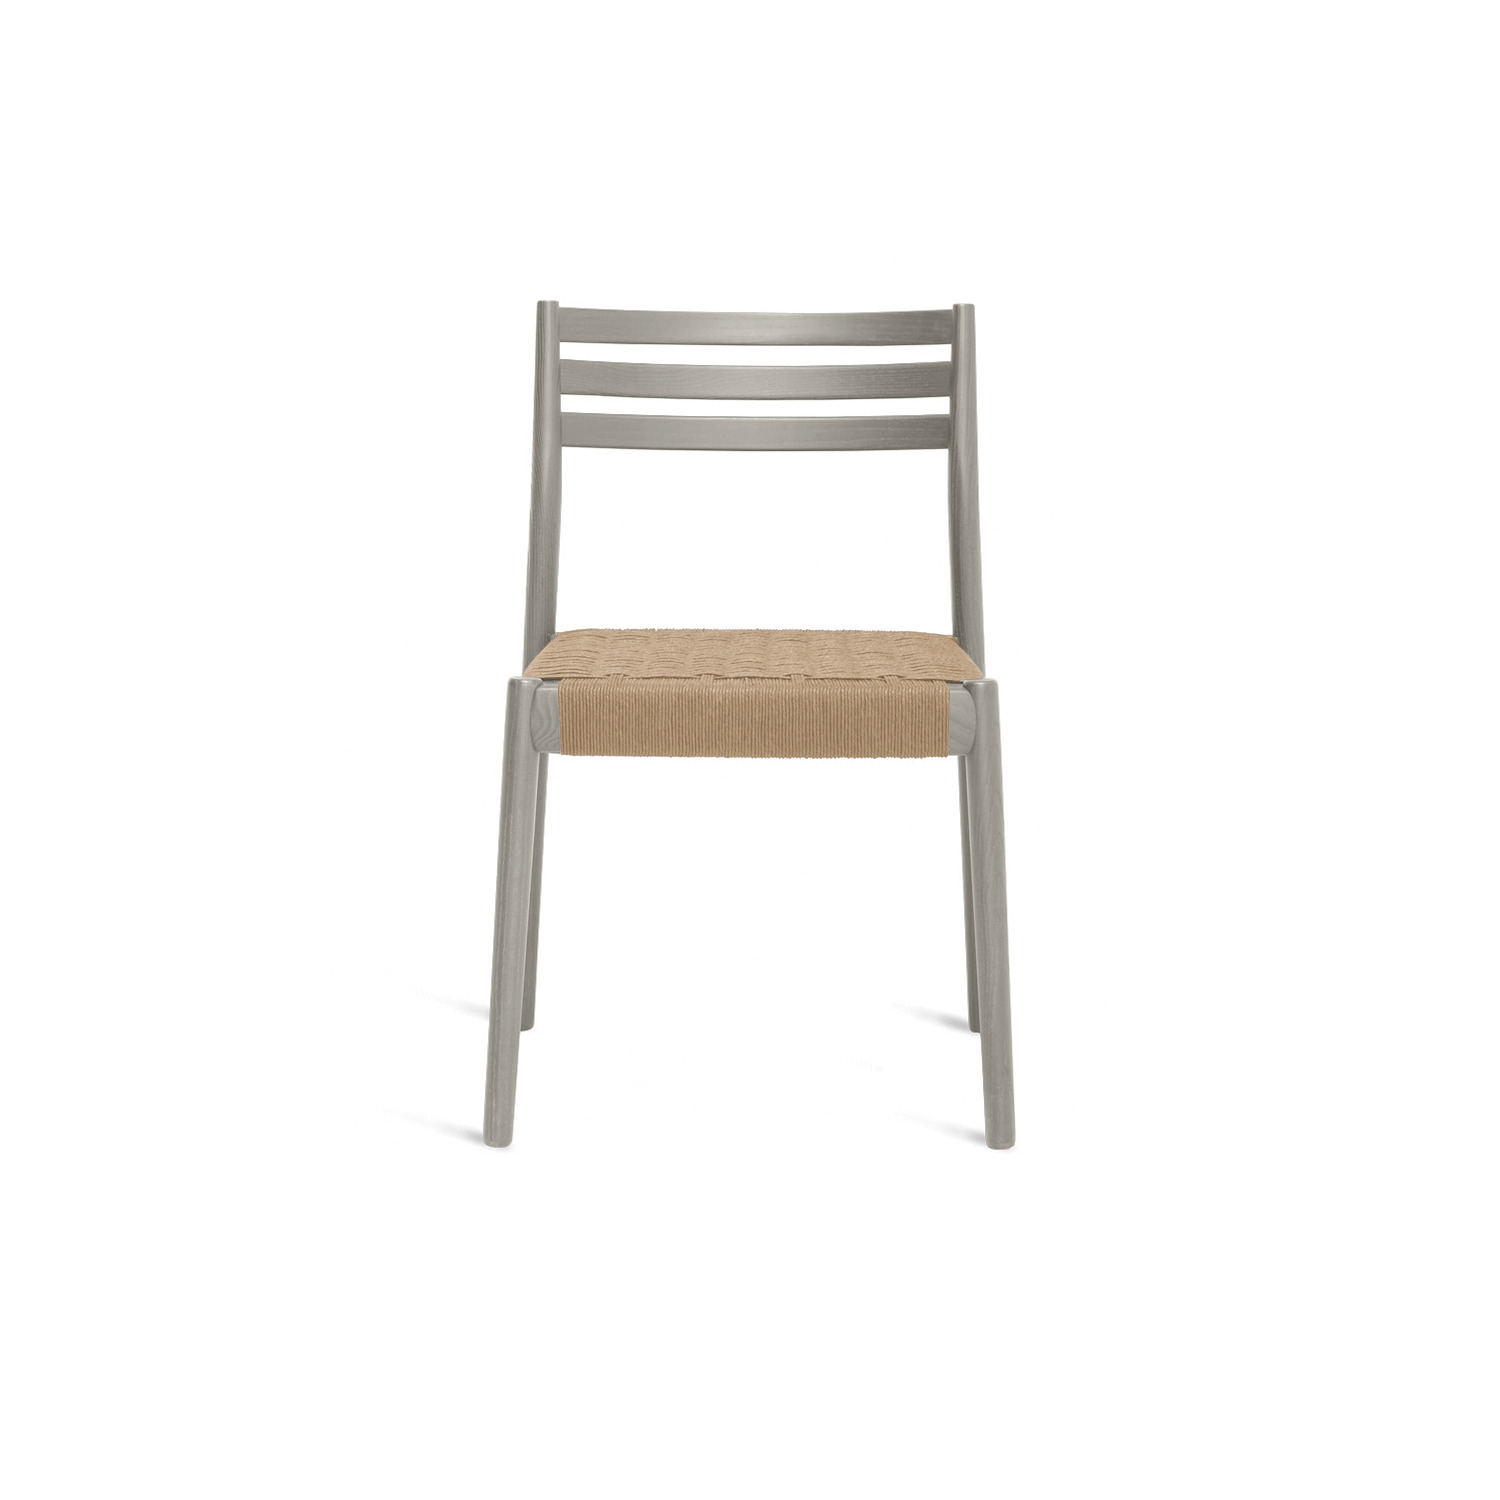 "Bogart Stackable Wood Dining Chair, Woven Cord Seat, Grey "